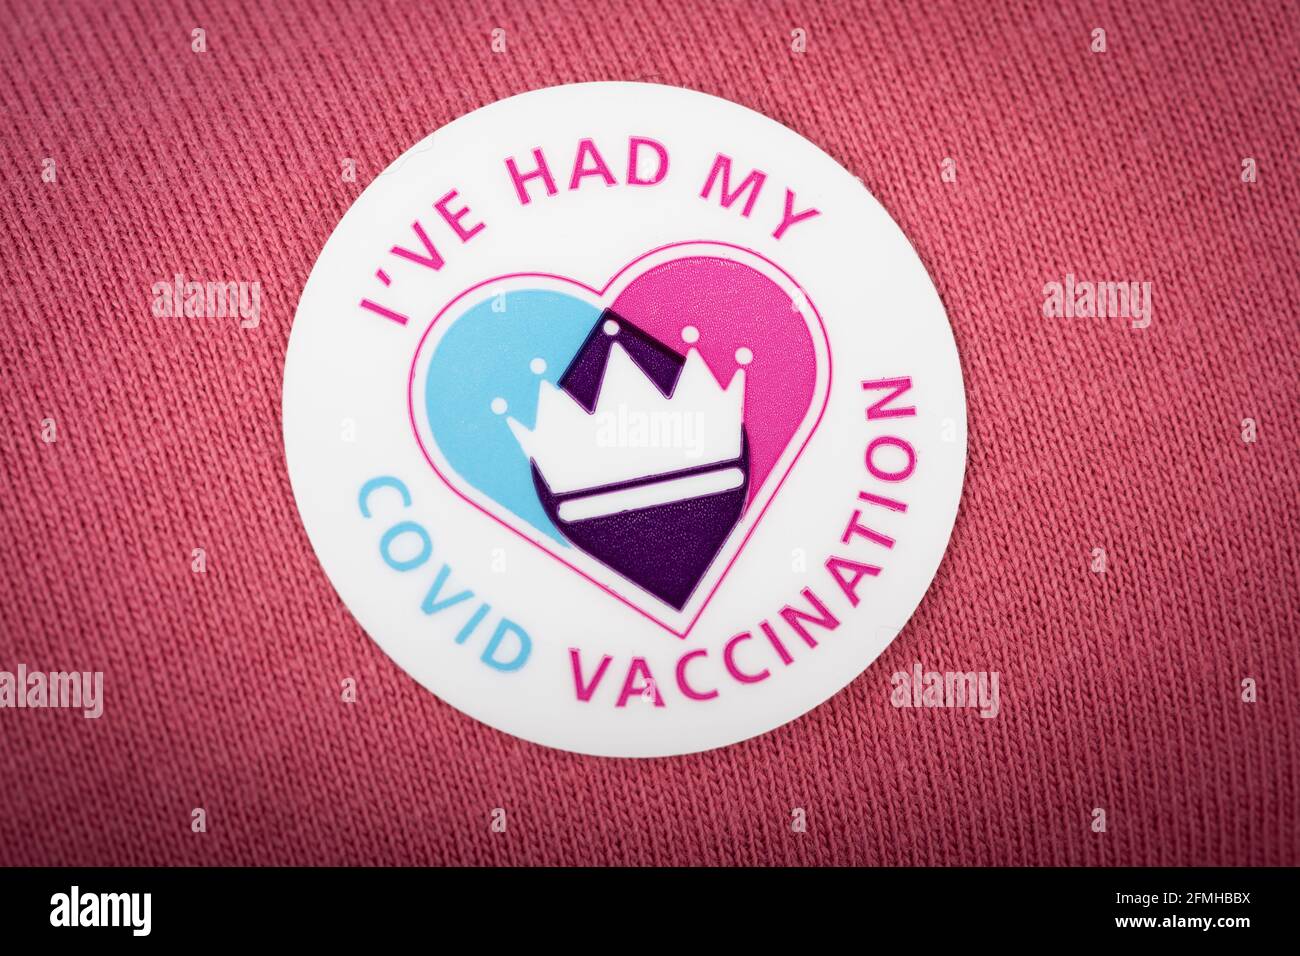 I badge that reads 'I've had my covid vaccination' shot on a person's clothing. Stock Photo